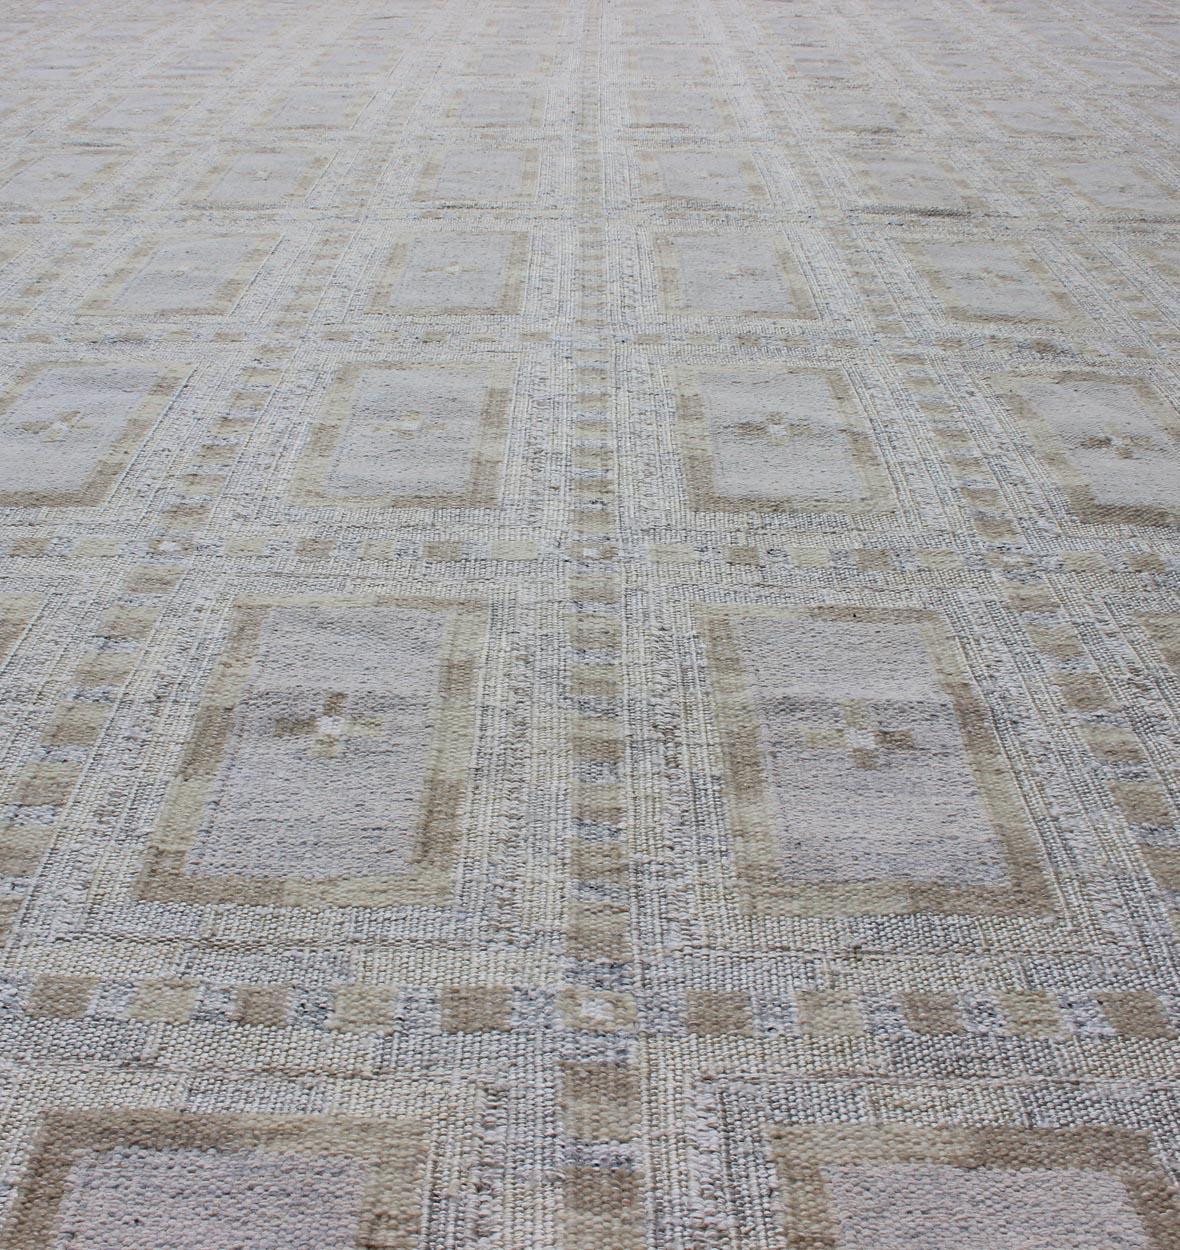 Very Large Modern Scandinavian Flat-Weave Rug with All-Over Rectangular Design In Excellent Condition For Sale In Atlanta, GA